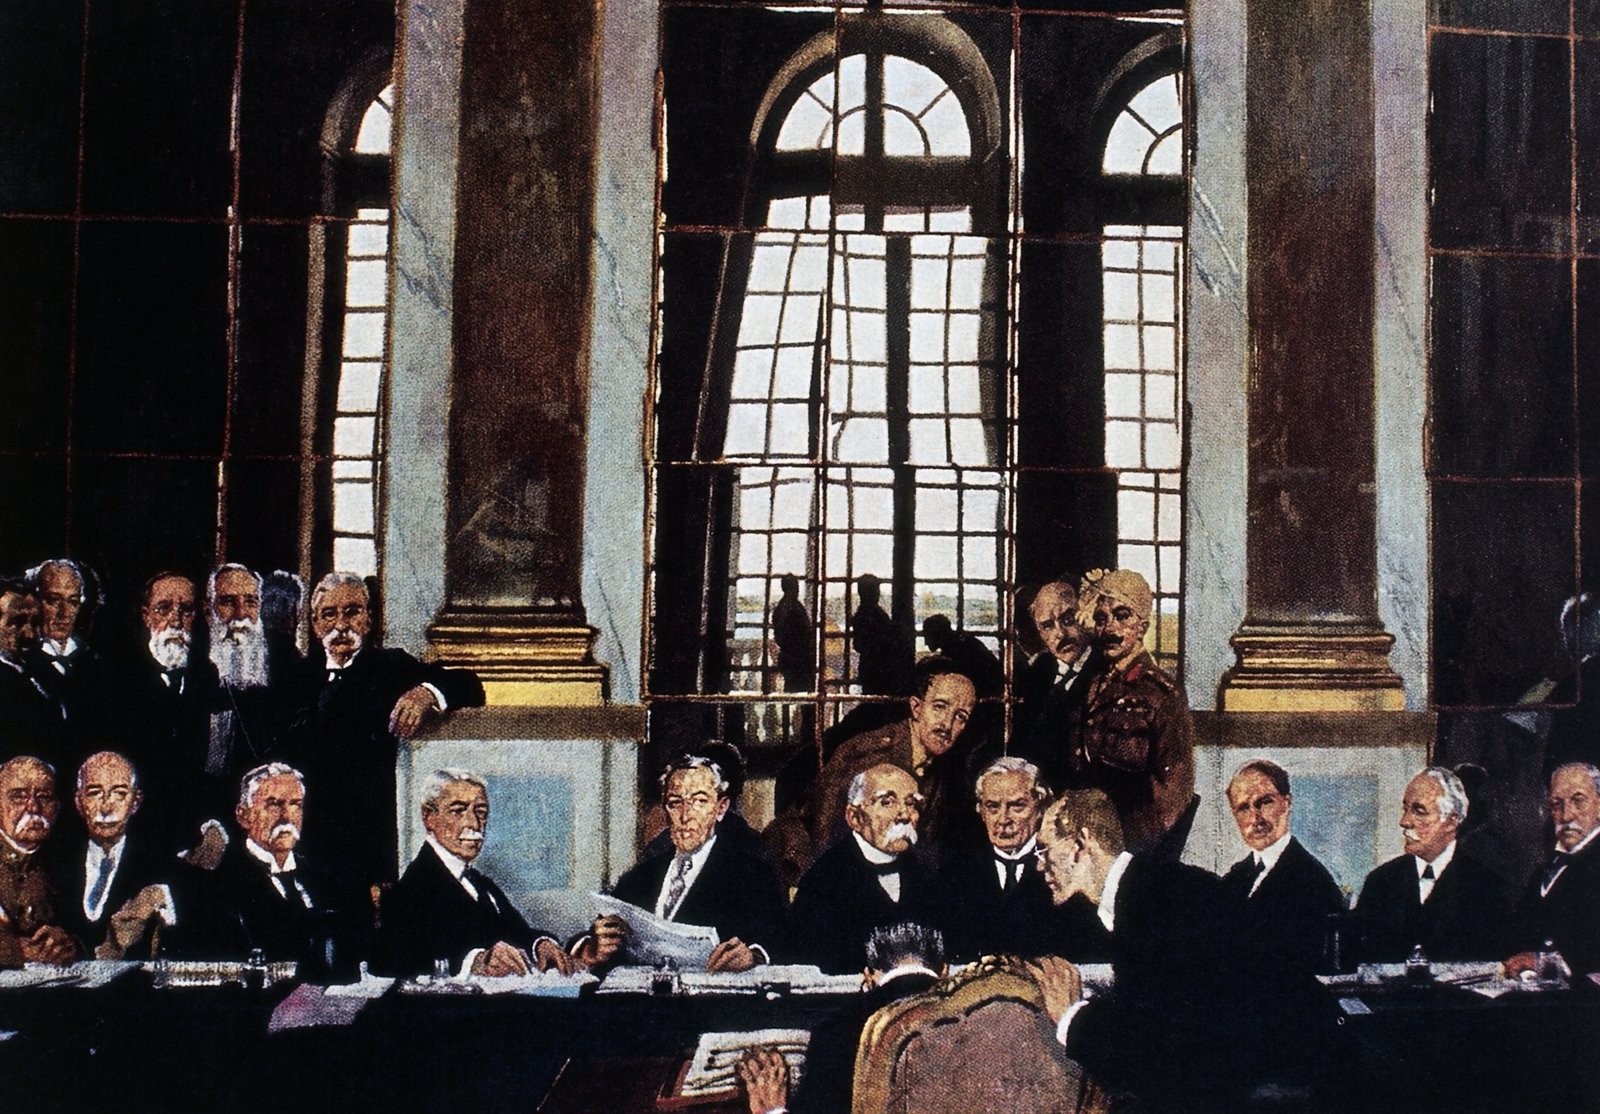 Image - The signing of the Treaty of Versailles, Paris 1920 (Credit: Getty Images)